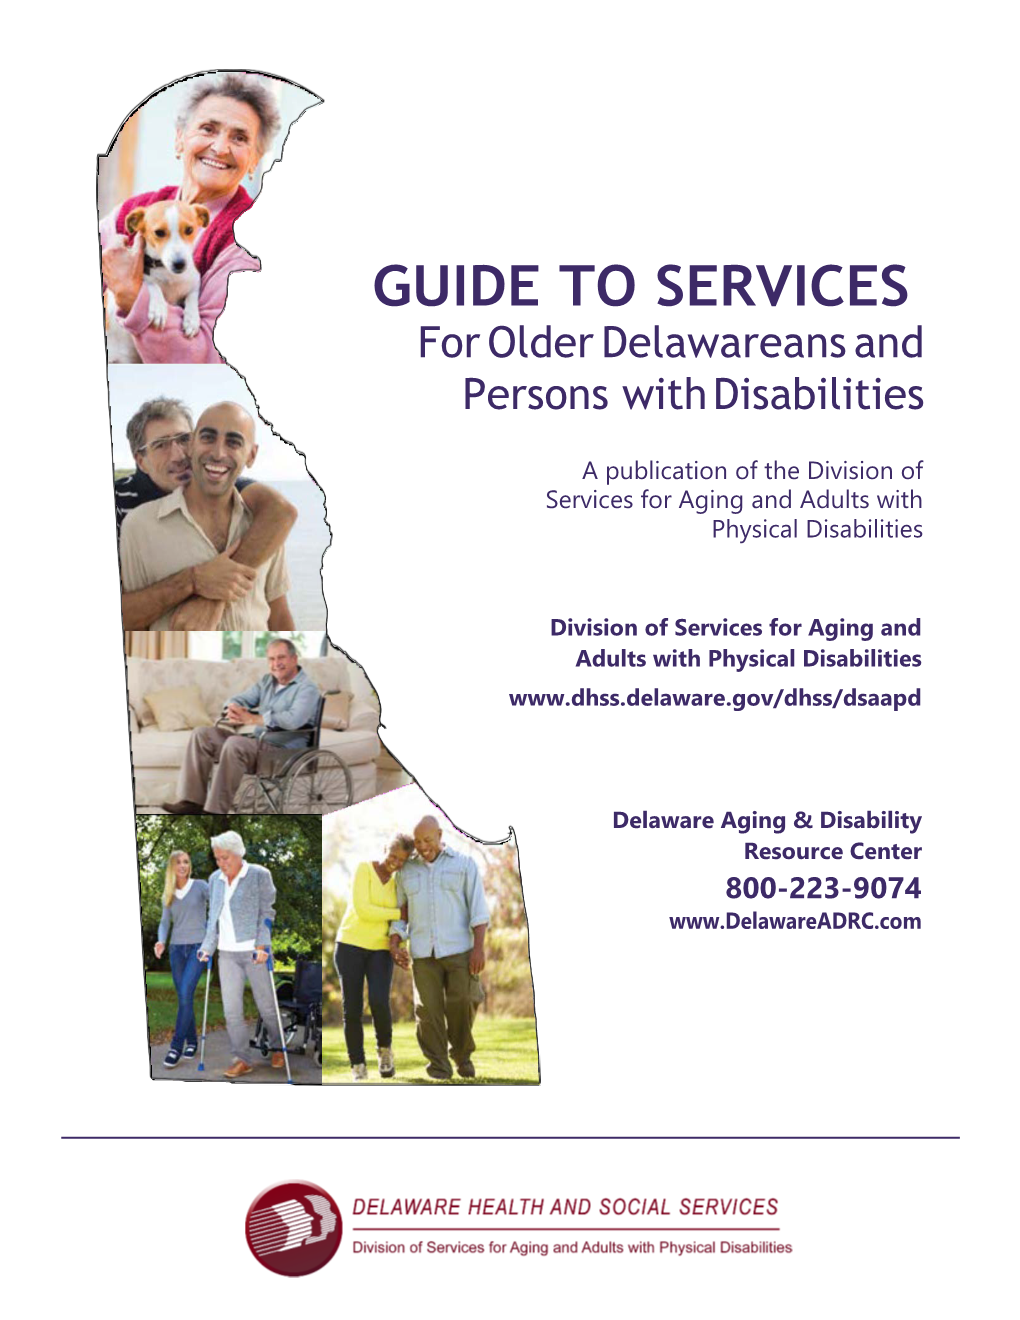 GUIDE to SERVICES for Older Delawareans and Persons with Disabilities